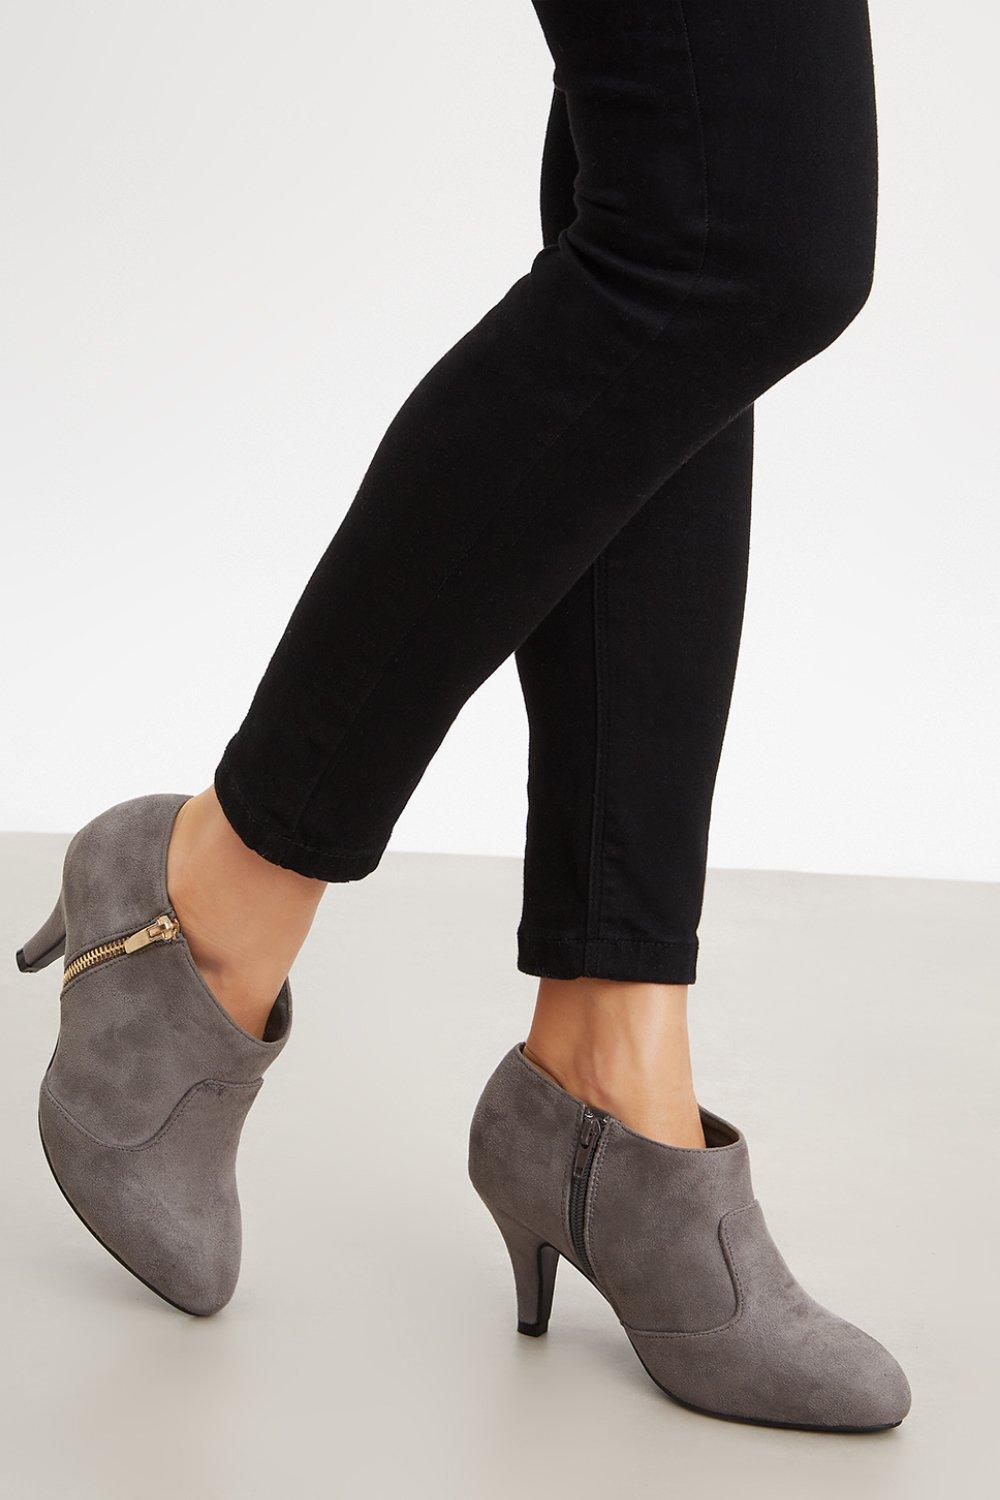 Women’s Good For The Sole: Extra Wide Fit Marlo Comfort Zip Heeled Ankle Boots - grey - 3